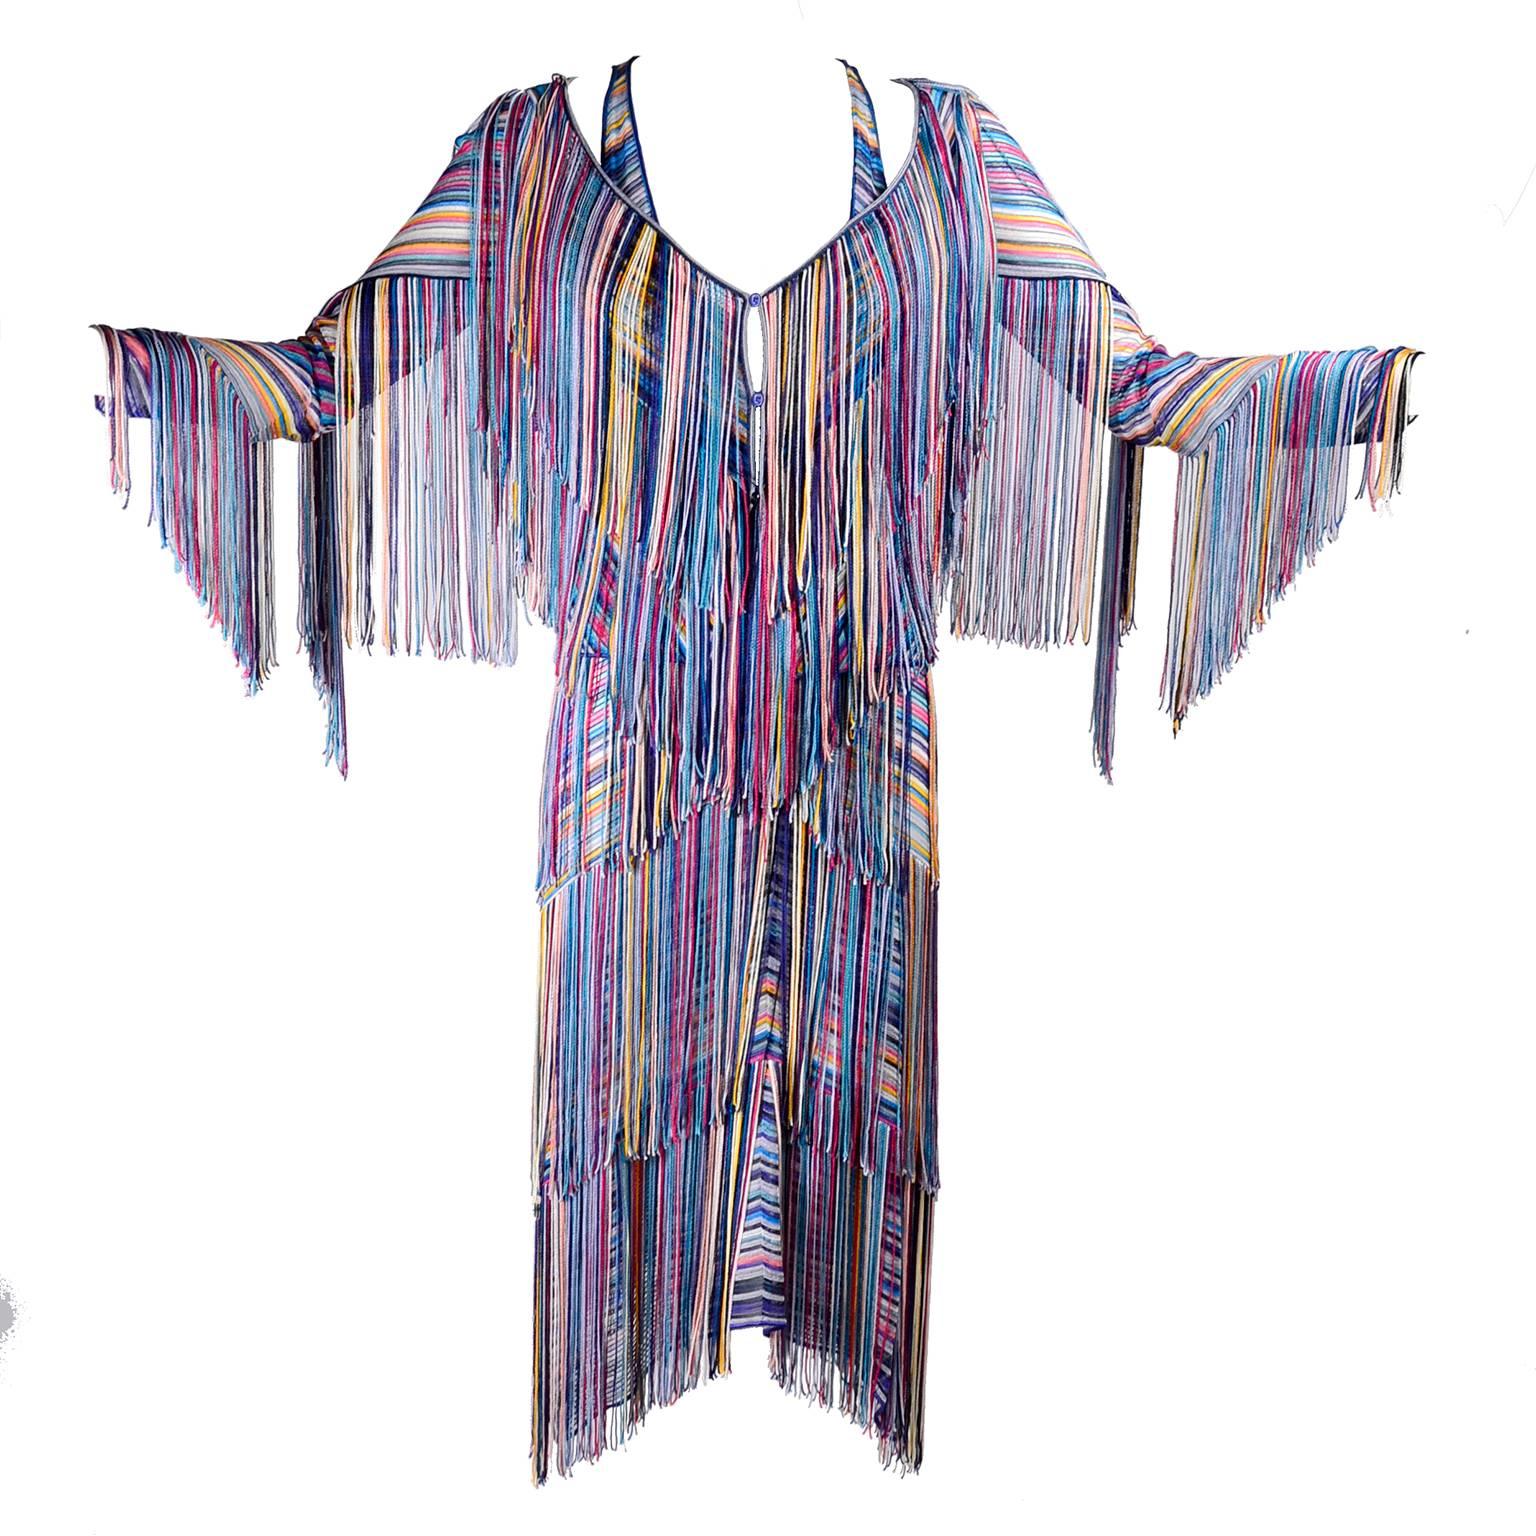 This multi colored woven slip dress has strands of tiered fringe in the same color as the dress in rows down the front.  This dress slips overhead and has a deep V in the front. This dress has a slight stretch and comes with a sweater or jacket in